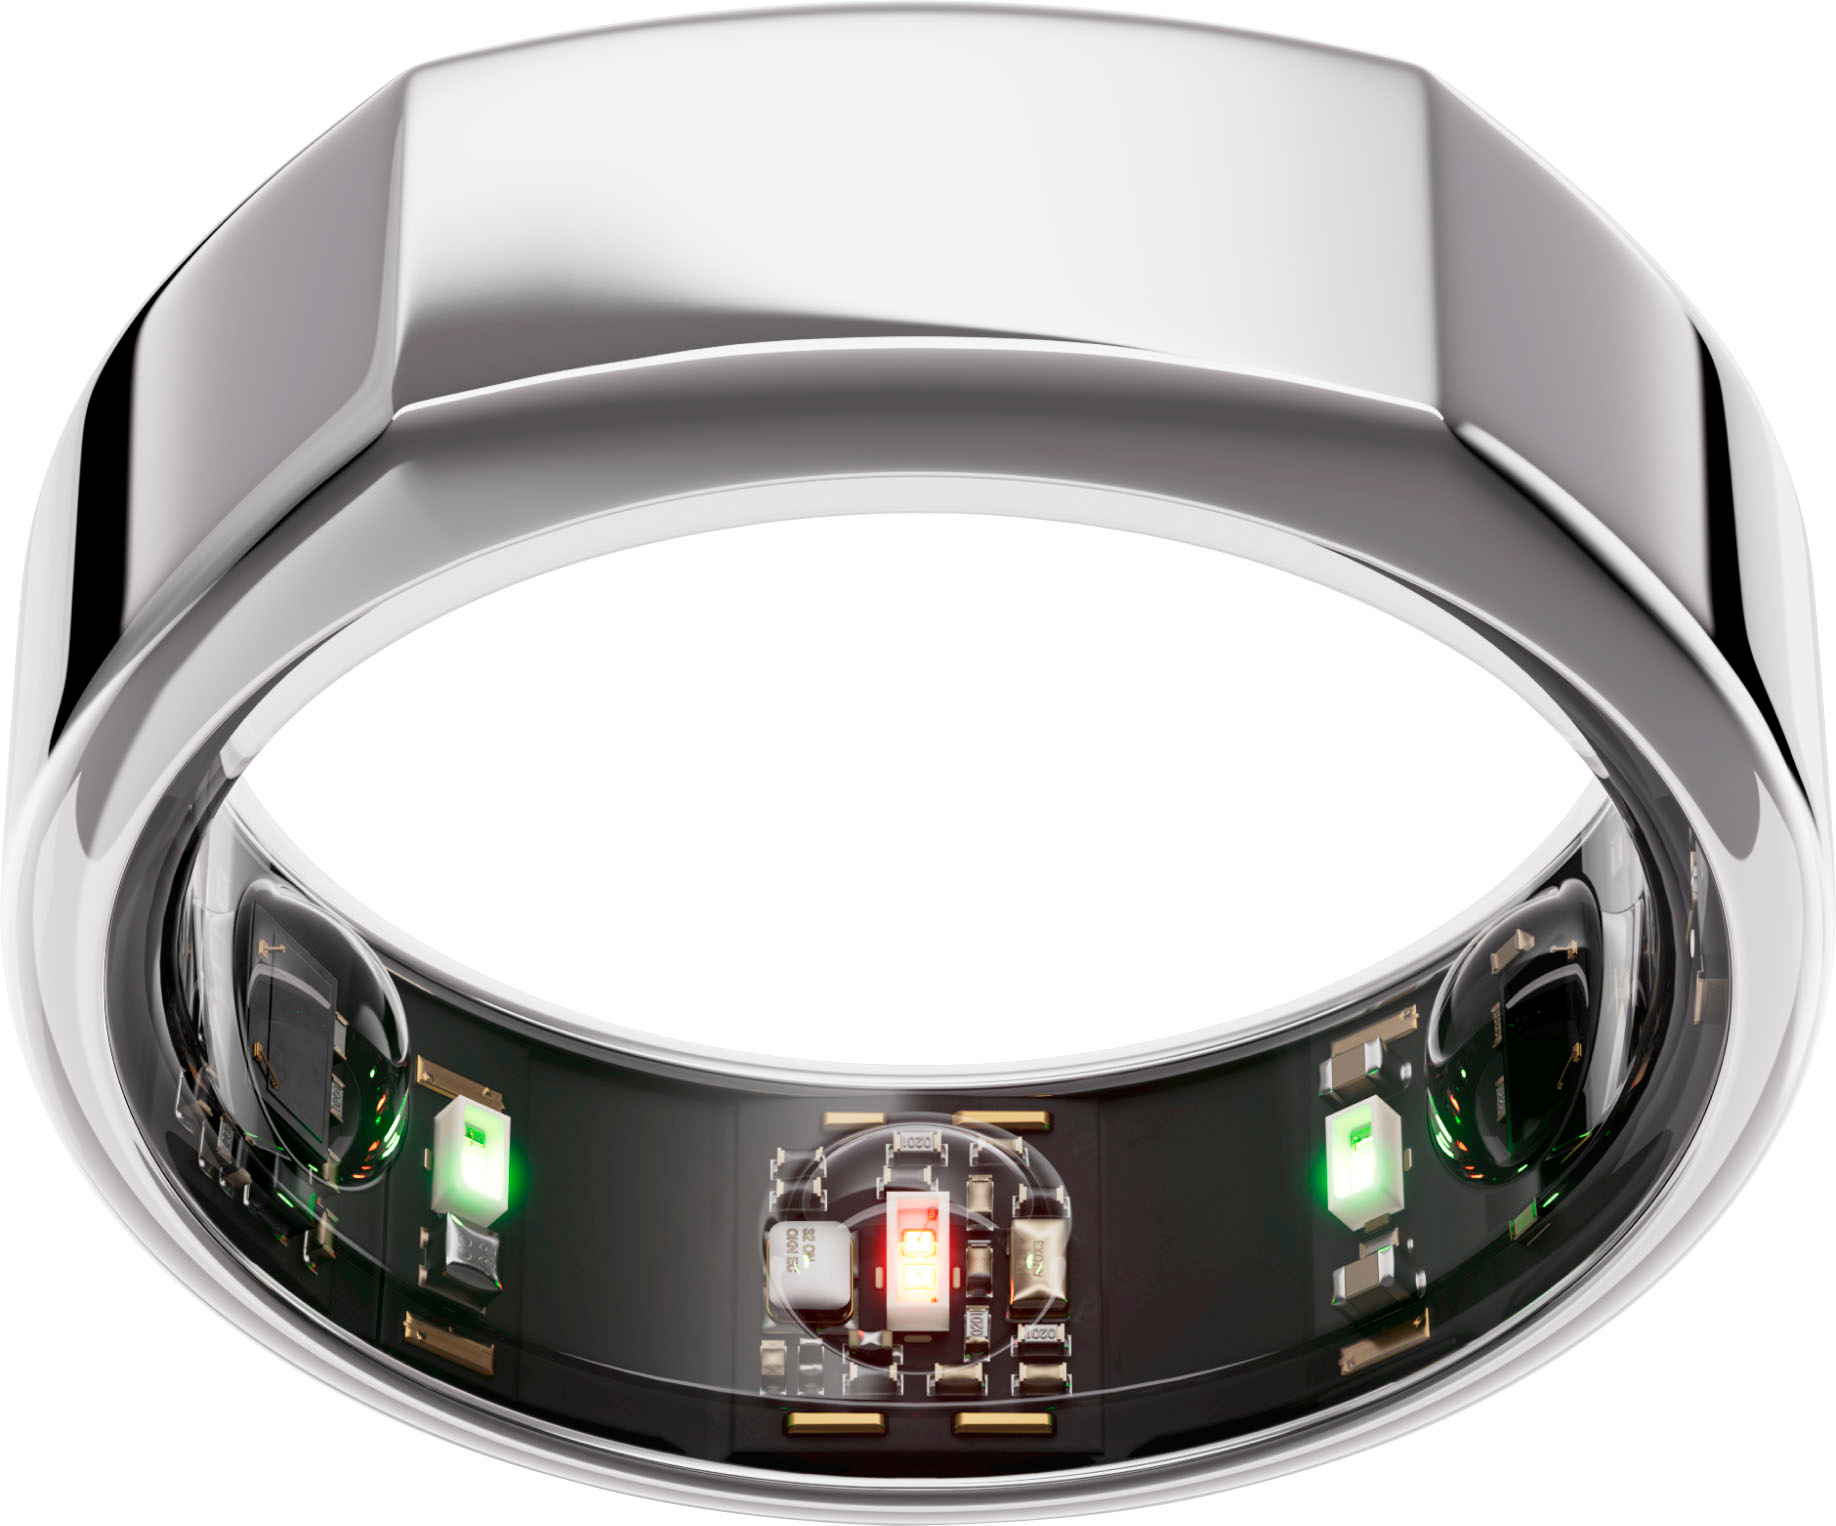 oura ring review — ABIGAIL GREEN